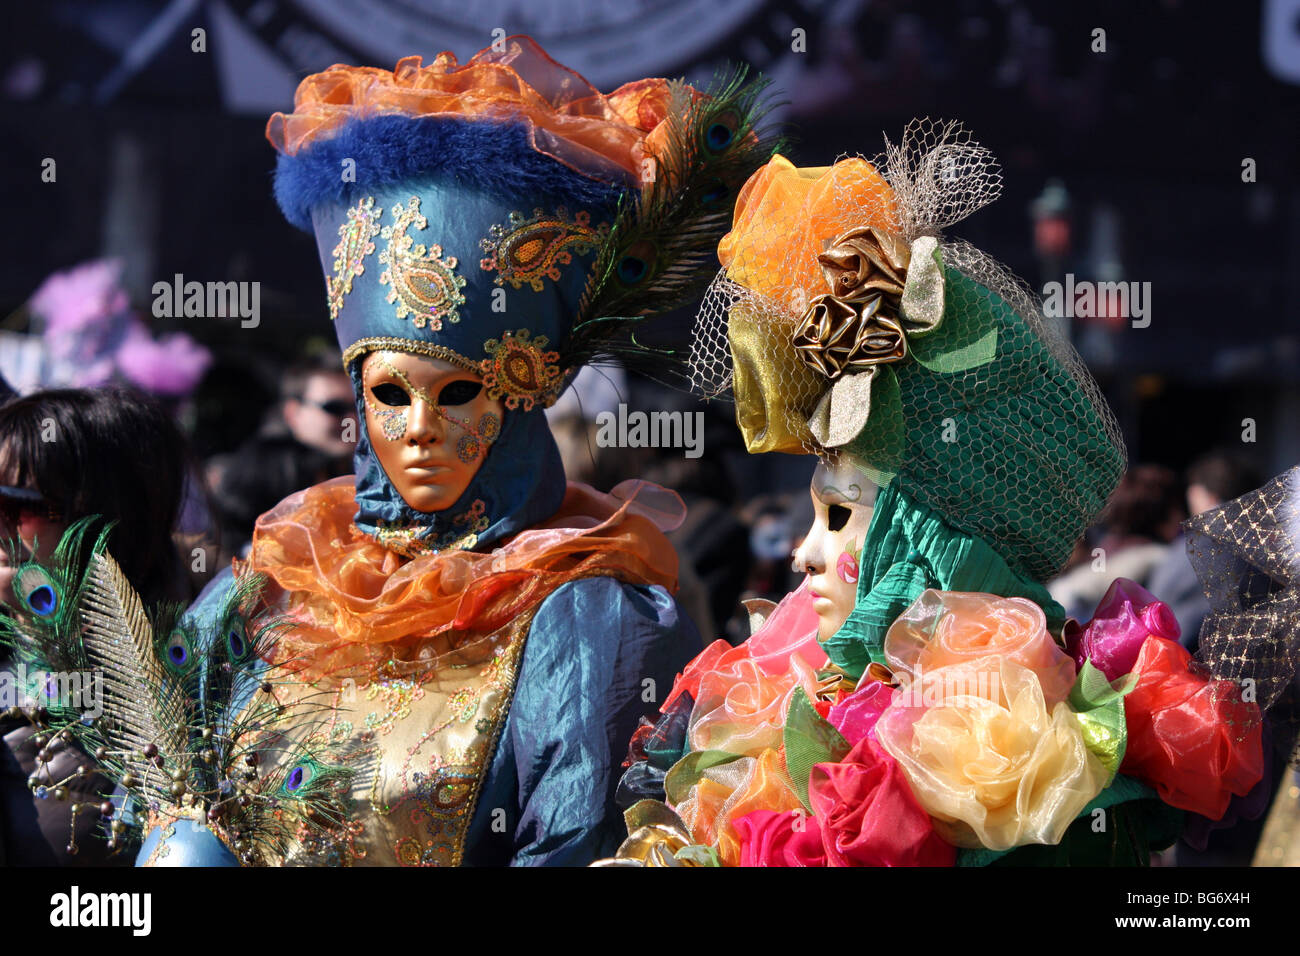 Couple of Venetian people wearing colourful masks and costumes Stock Photo